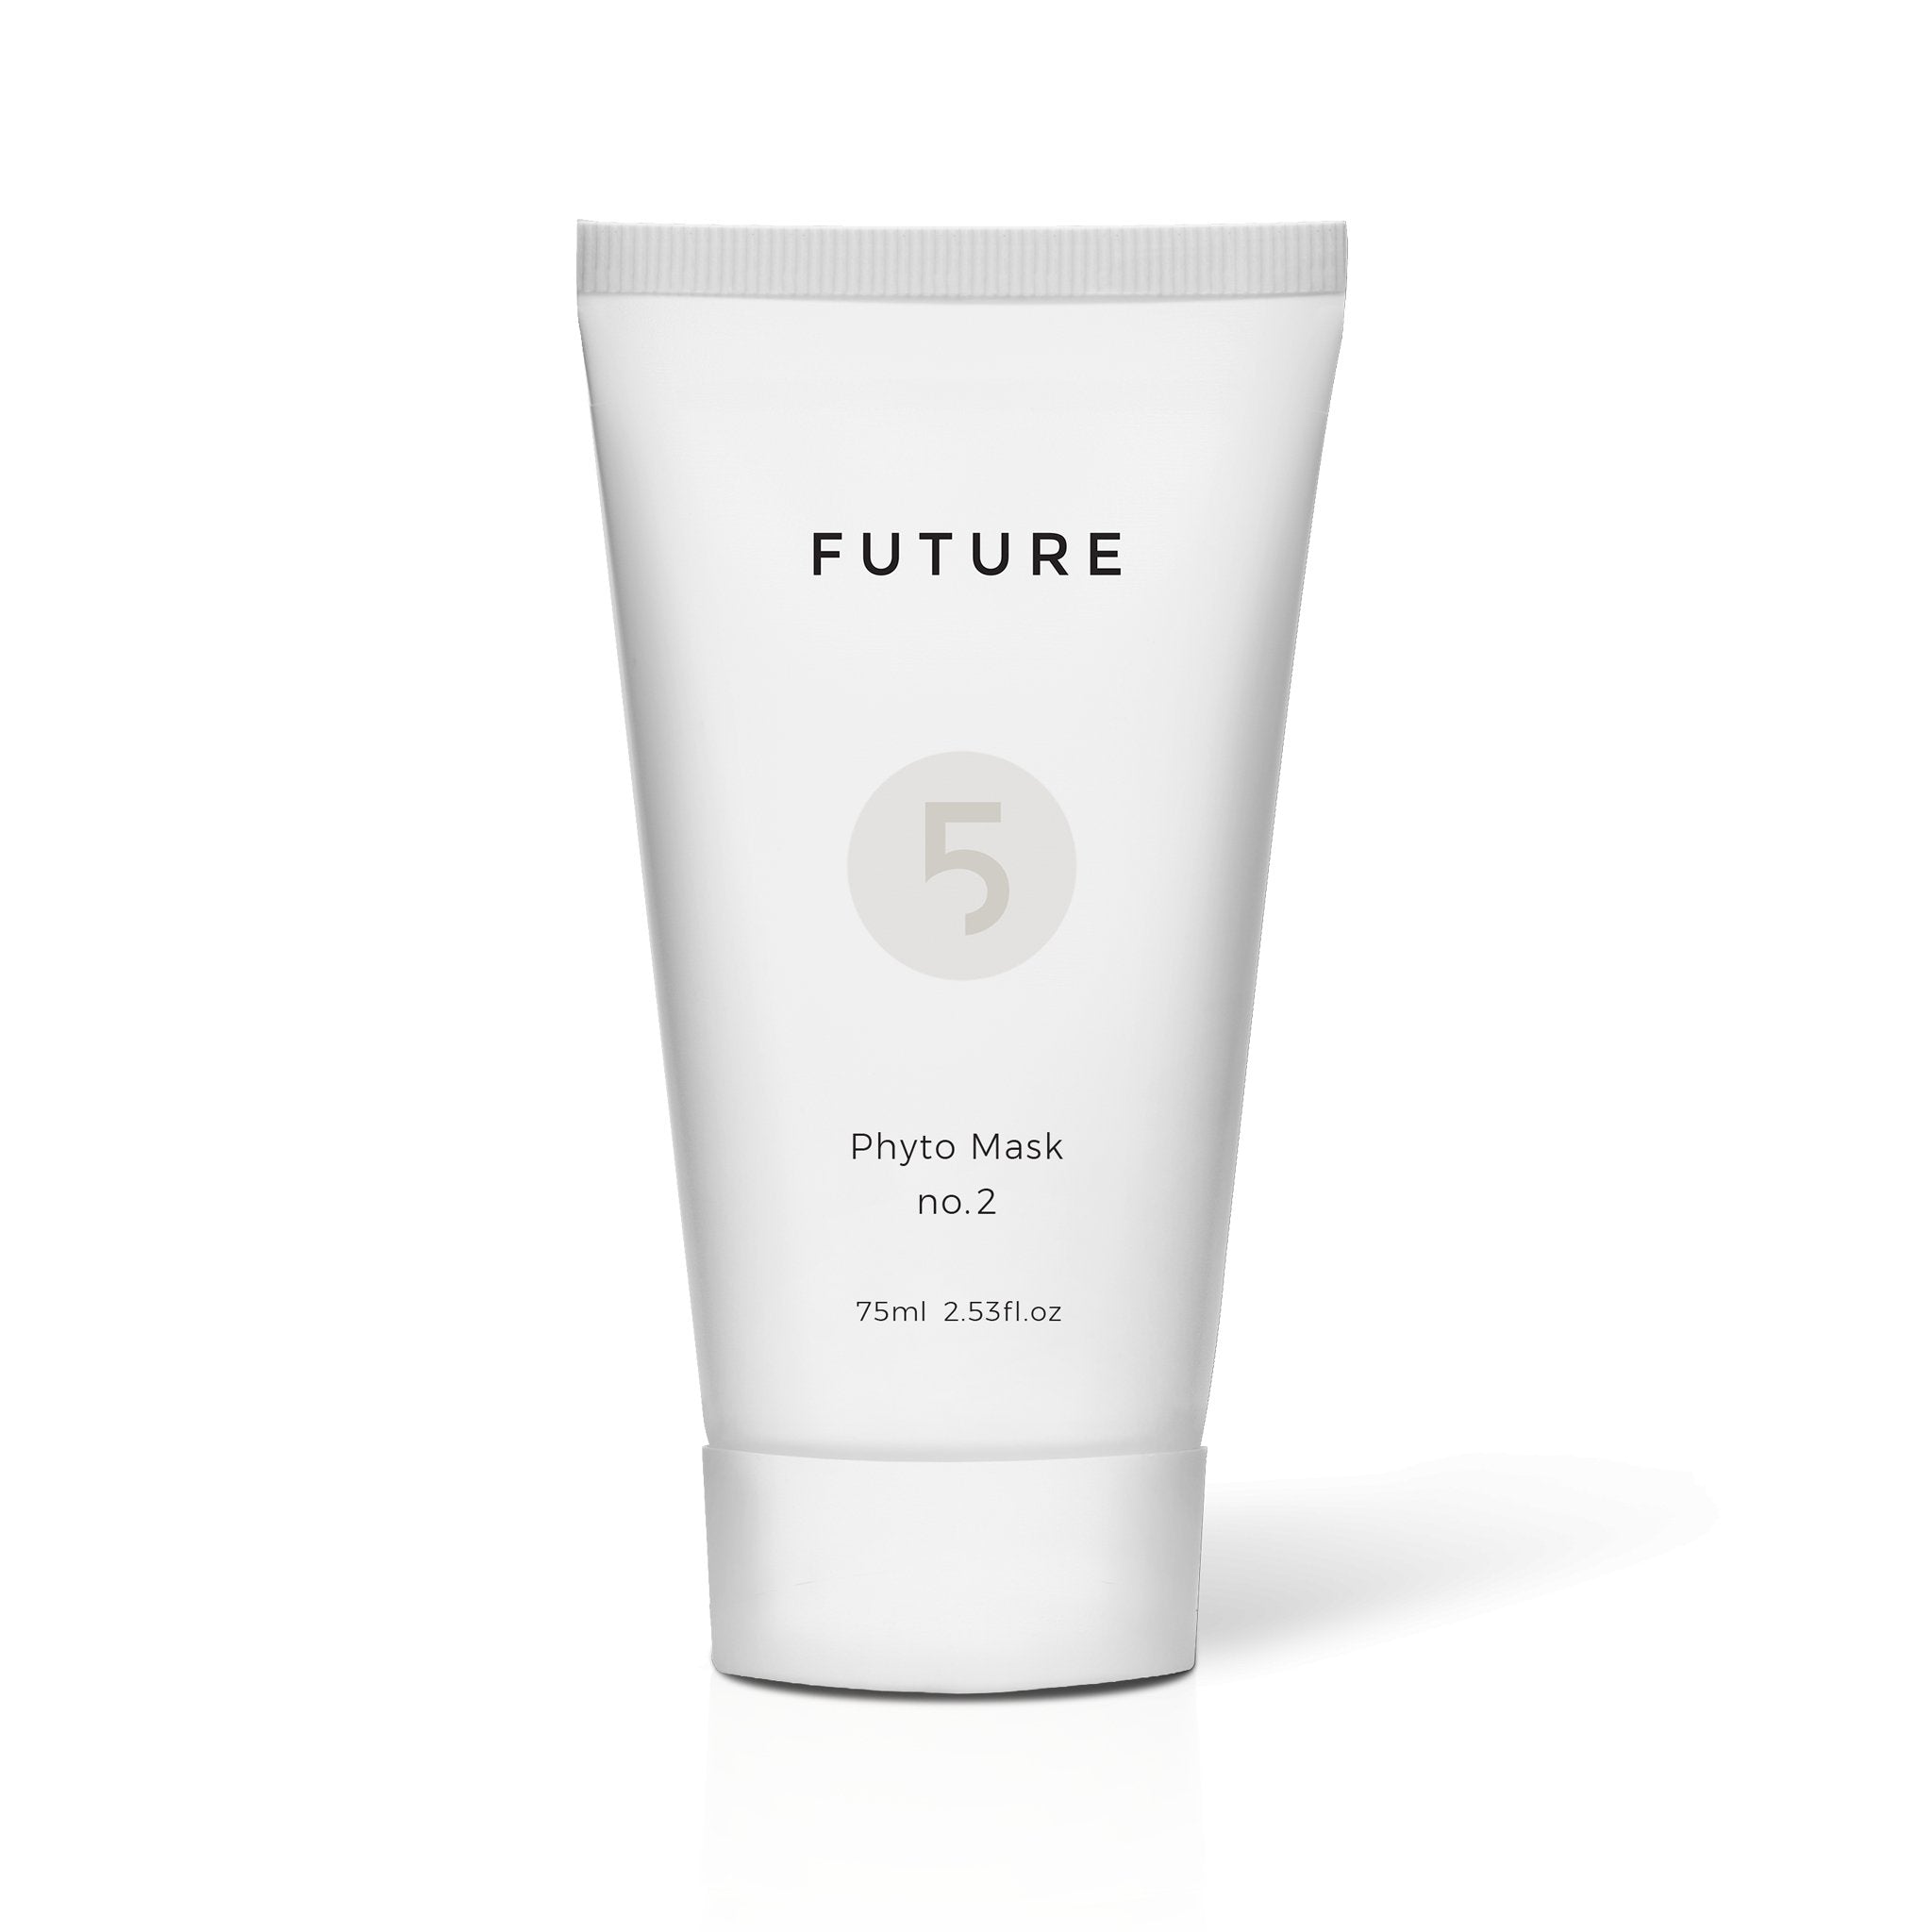 Phyto Mask No 2 - Future Cosmetics The 5 Elements